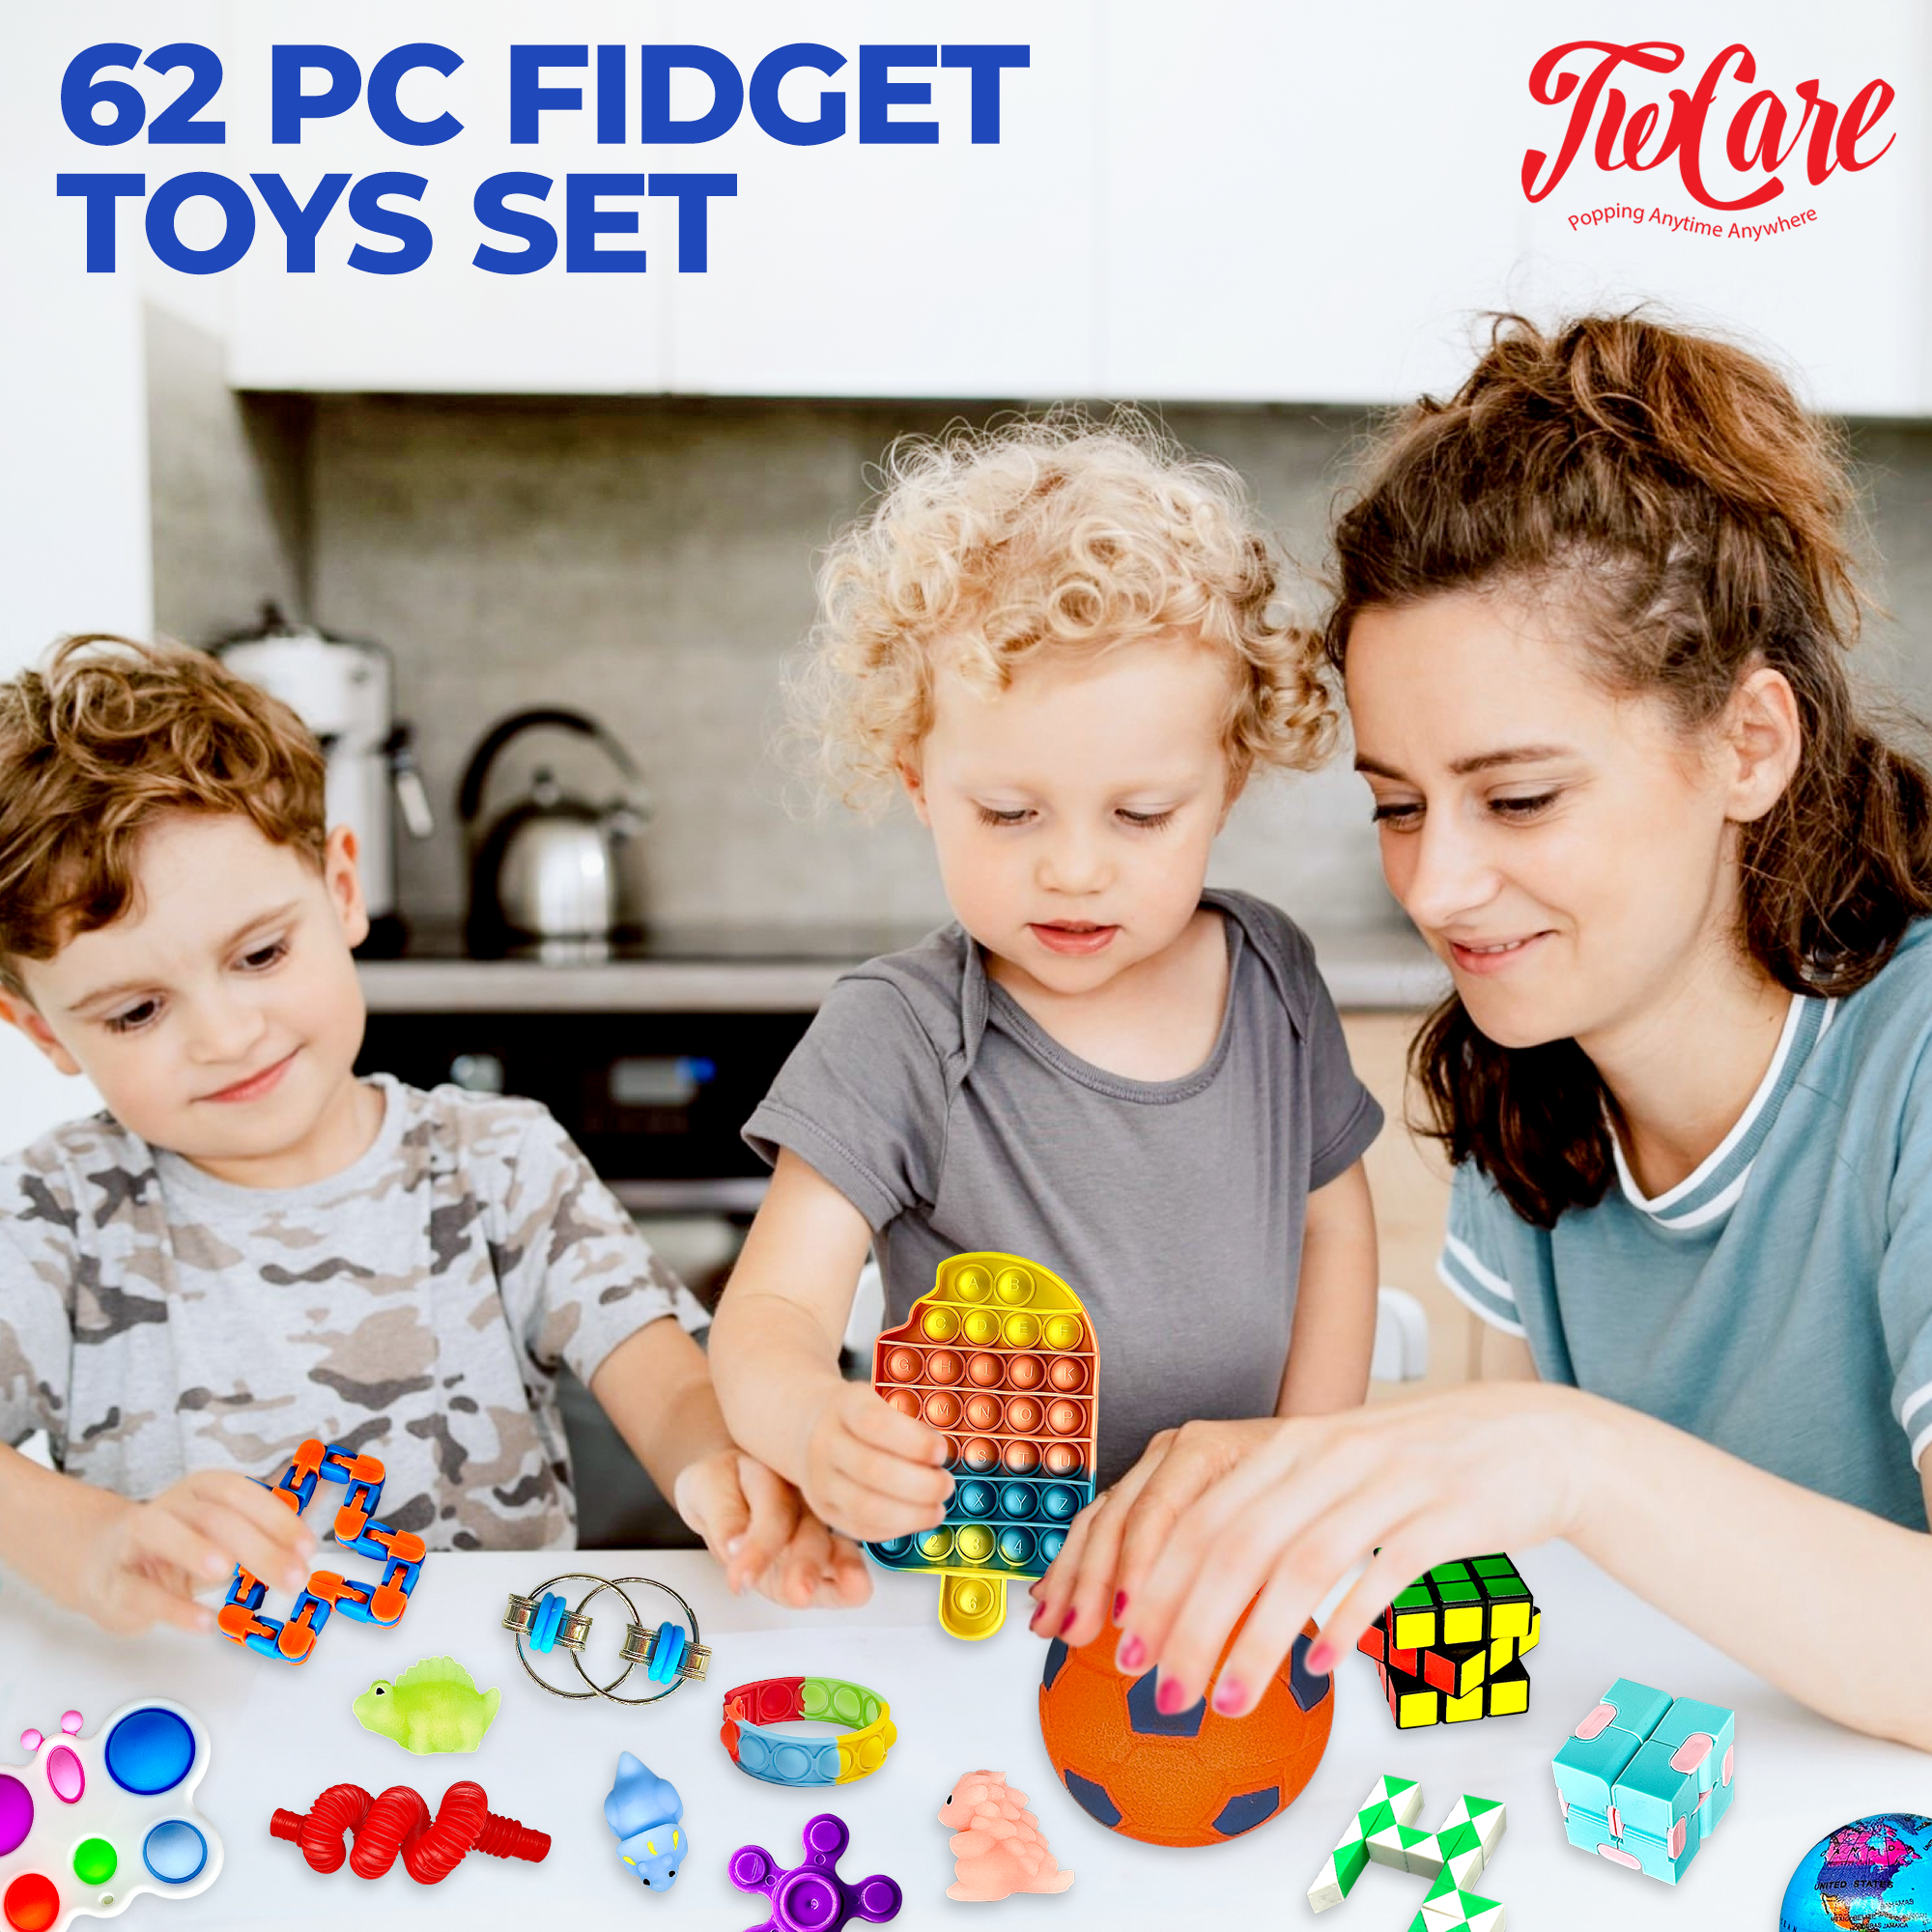 (62 Pcs) 2023 Upgraded Fidget Toys Set Party Favors Pop It Its Sensory Pack for Kids Stocking Stuffers Autism Stress Autistic Boys Girls Adults Fun Treasure Box Classroom Prizes Ages 3-12 Years Old